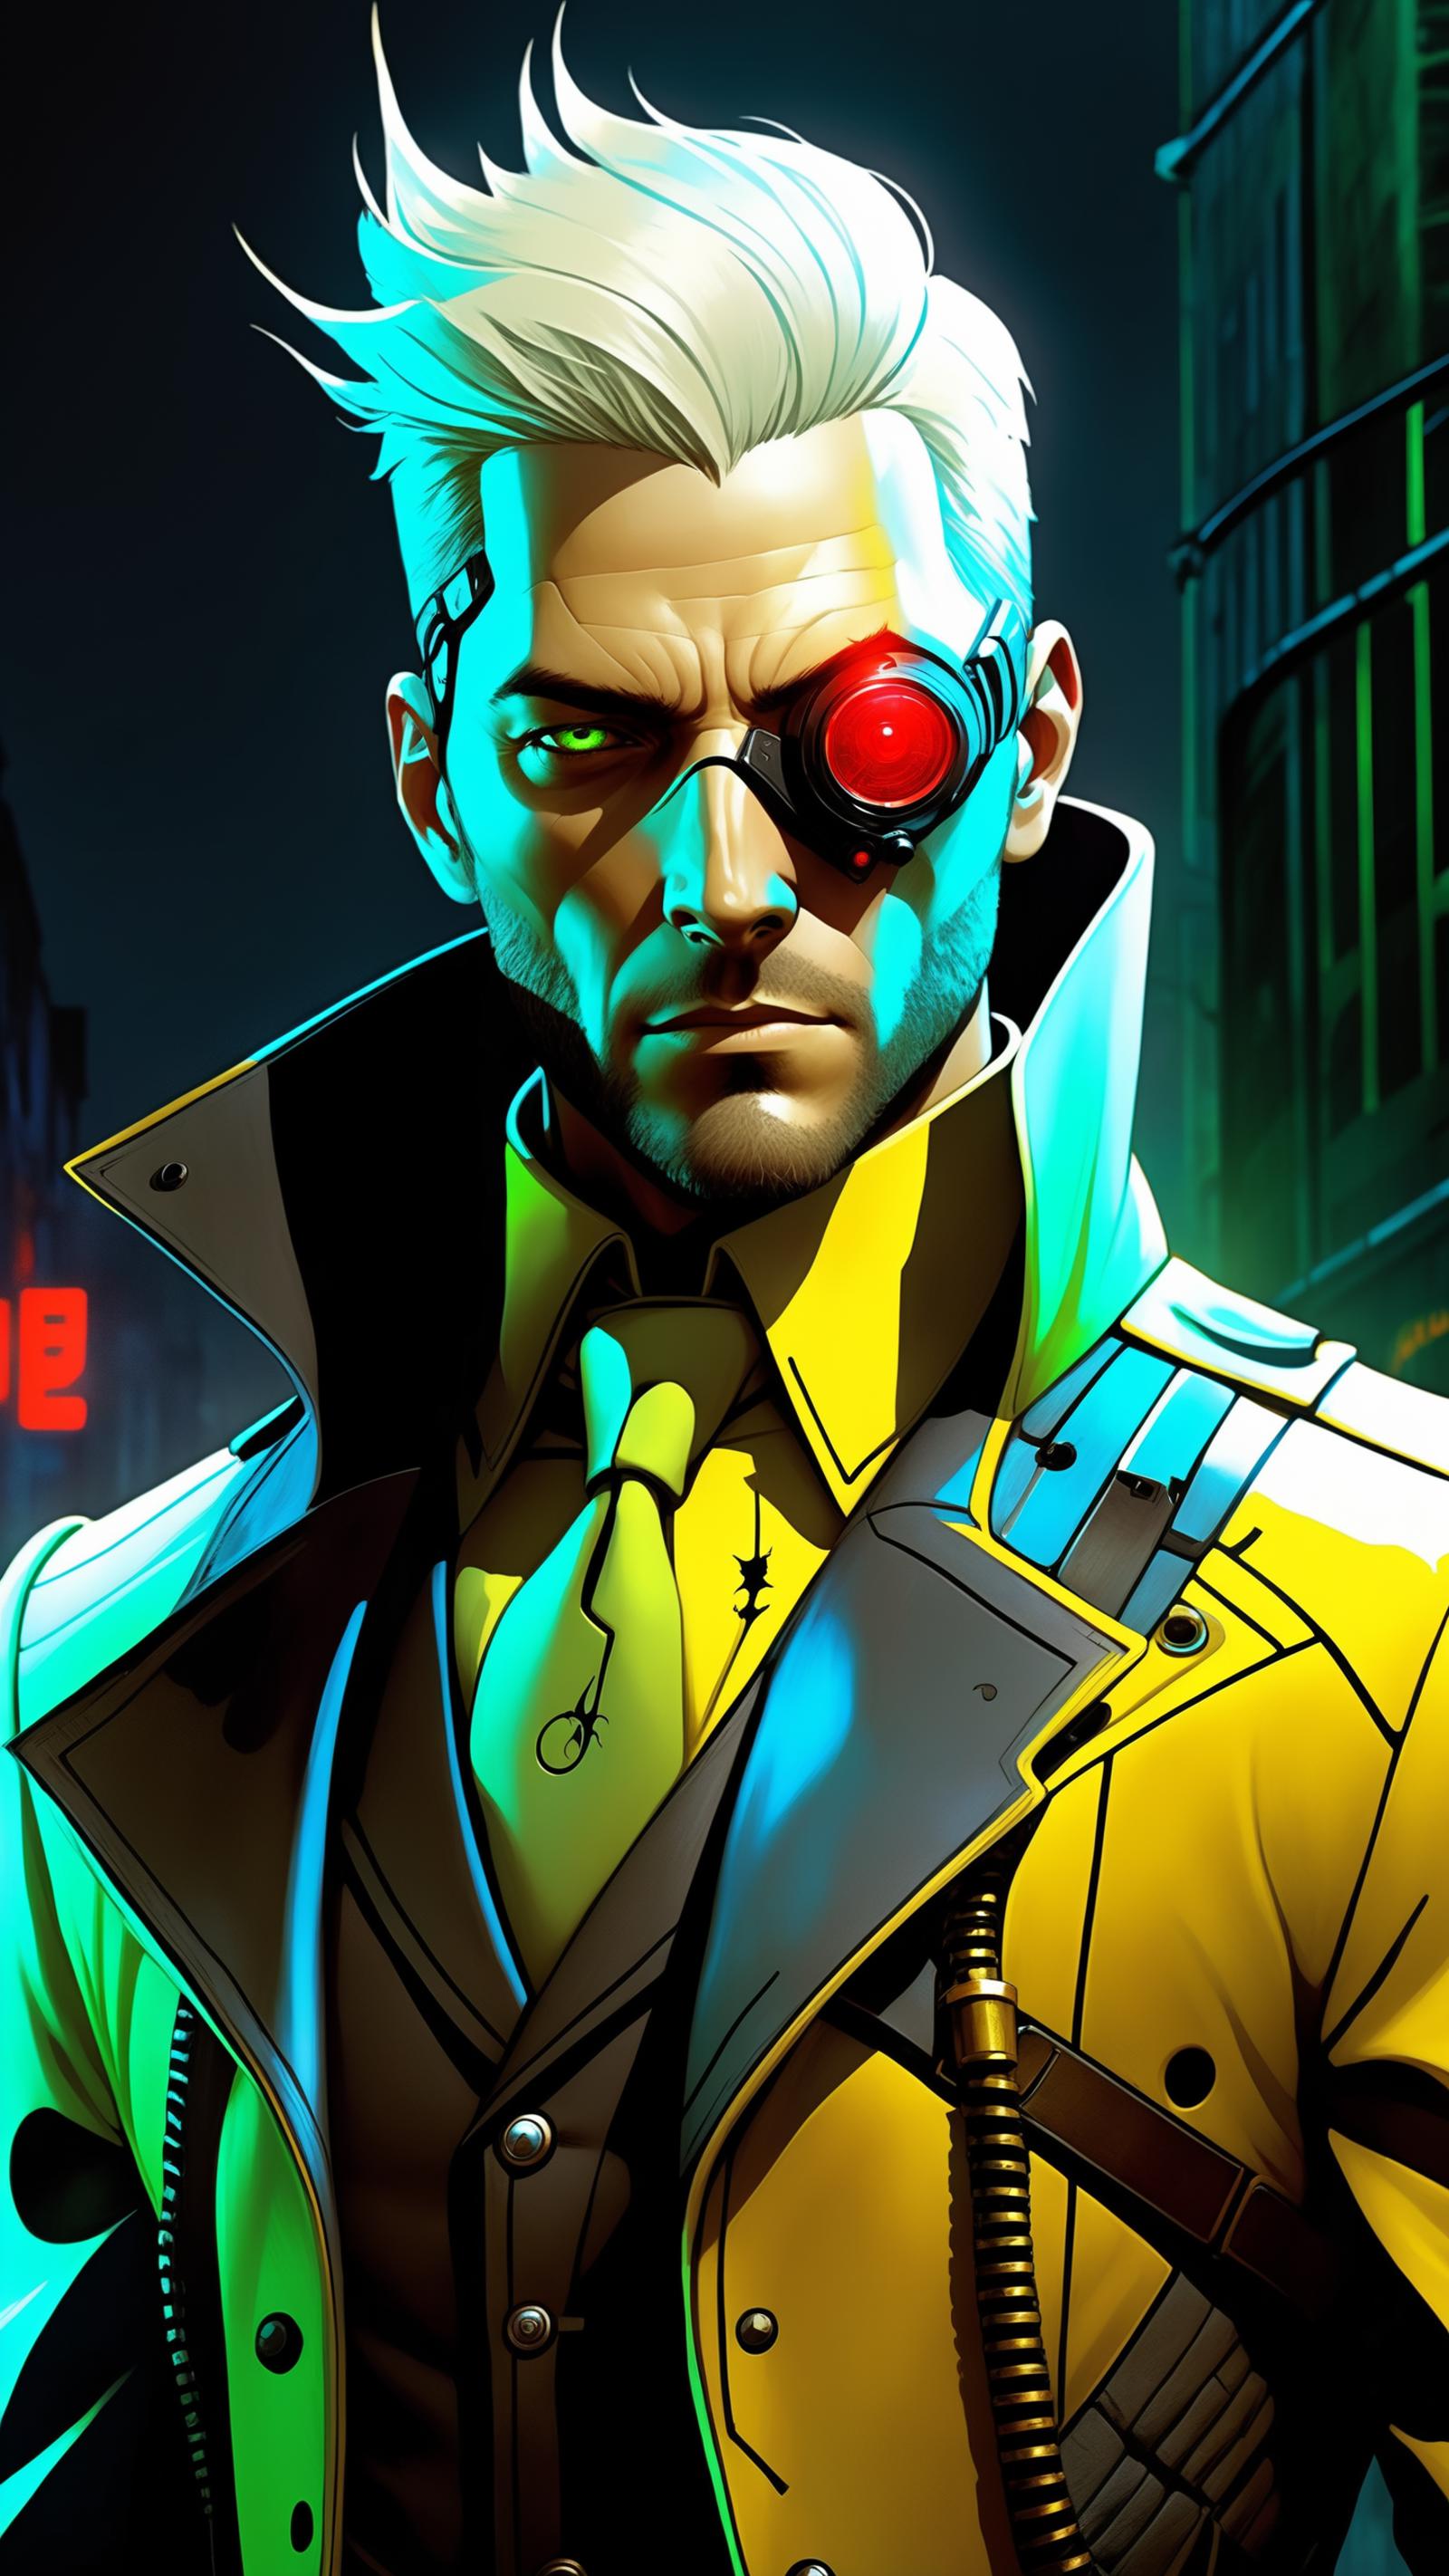 The Man in the Yellow Suit: A Cyberpunk Comic Book Character